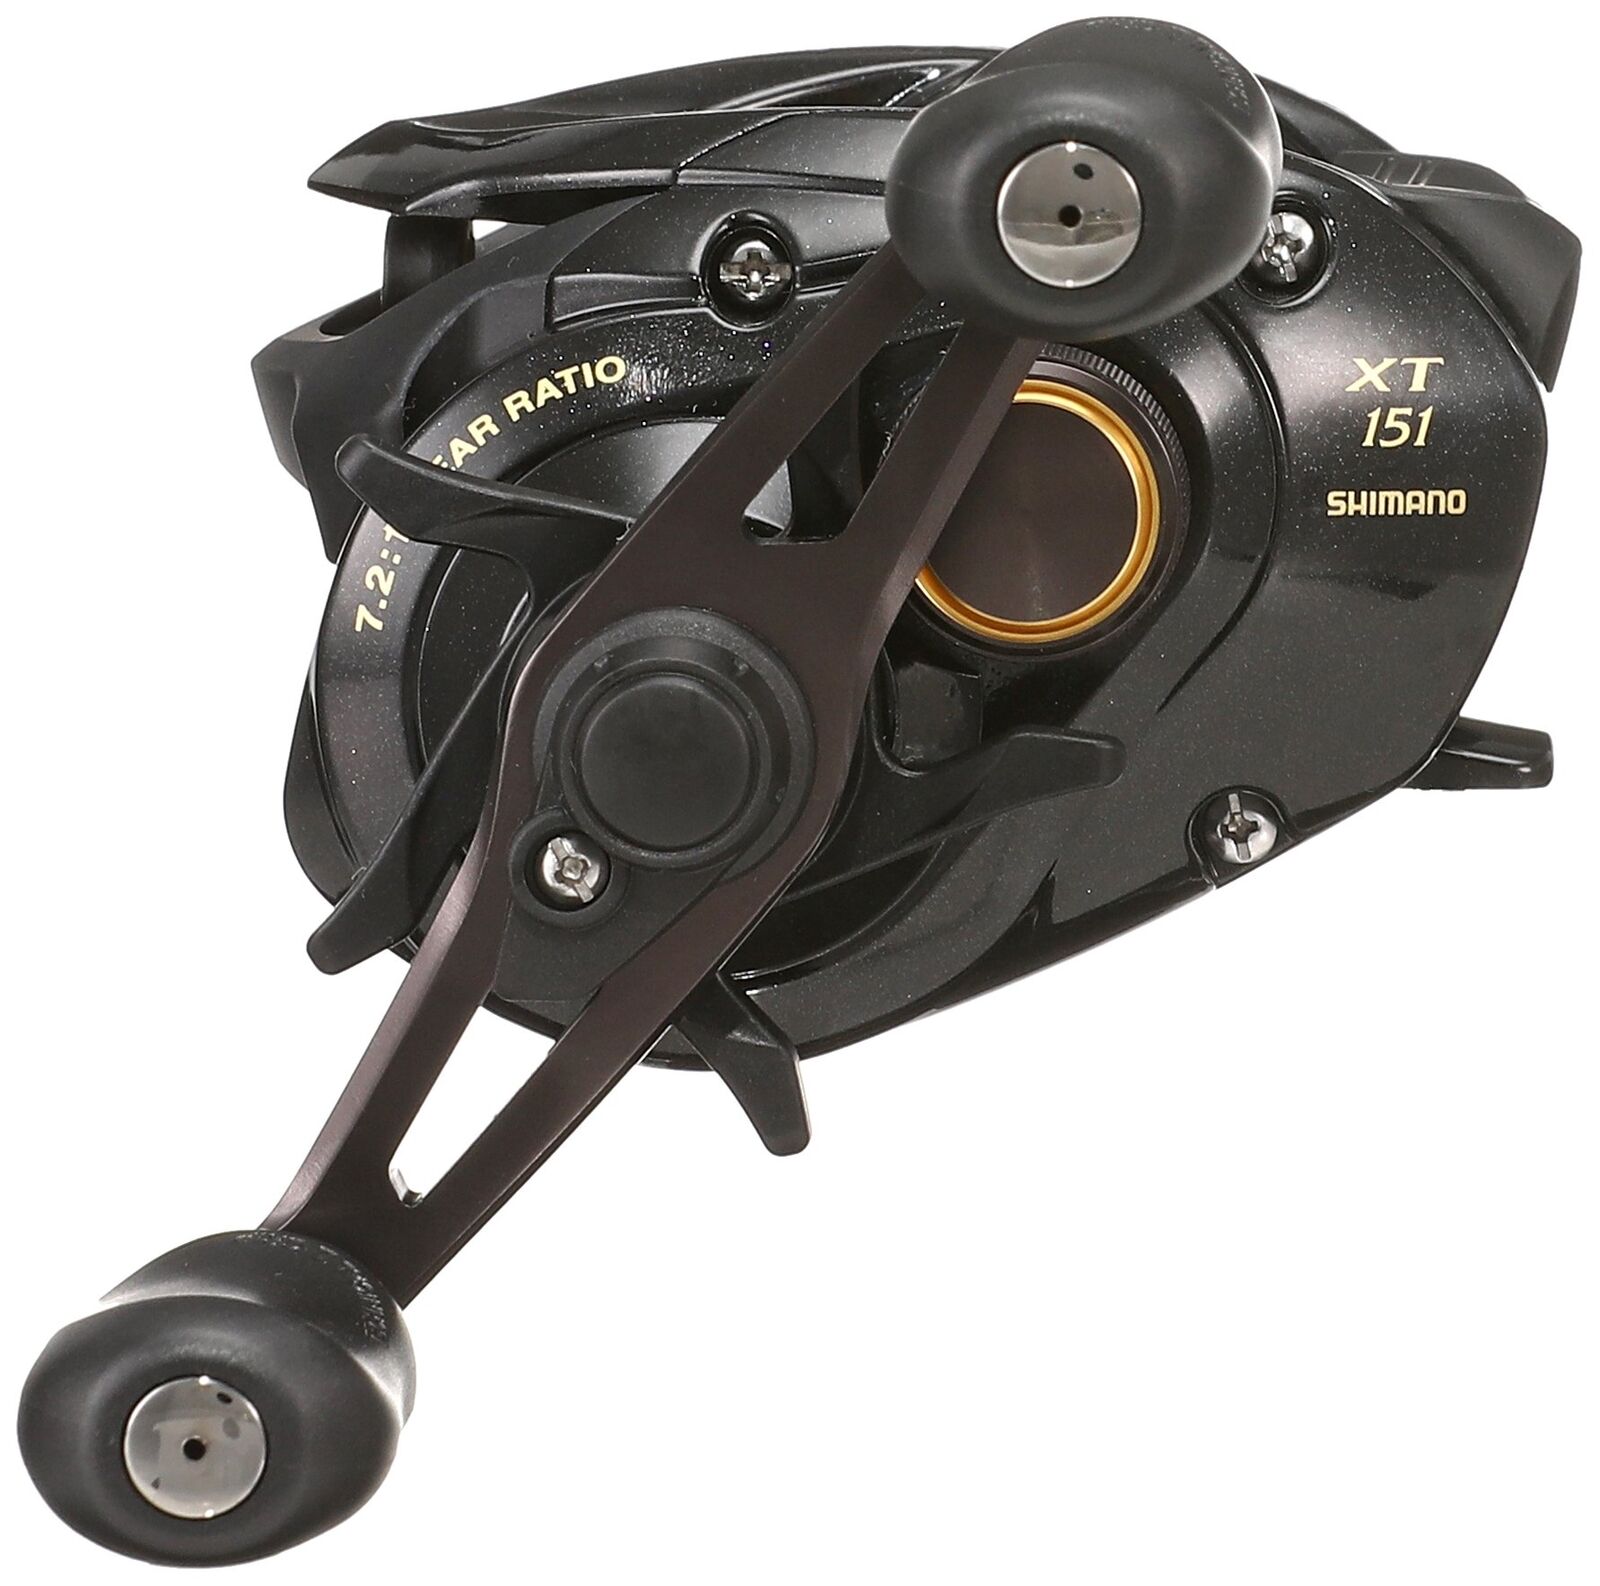 SHIMANO 17 Bass One XT 151 Left Handle Bait Casting reel from